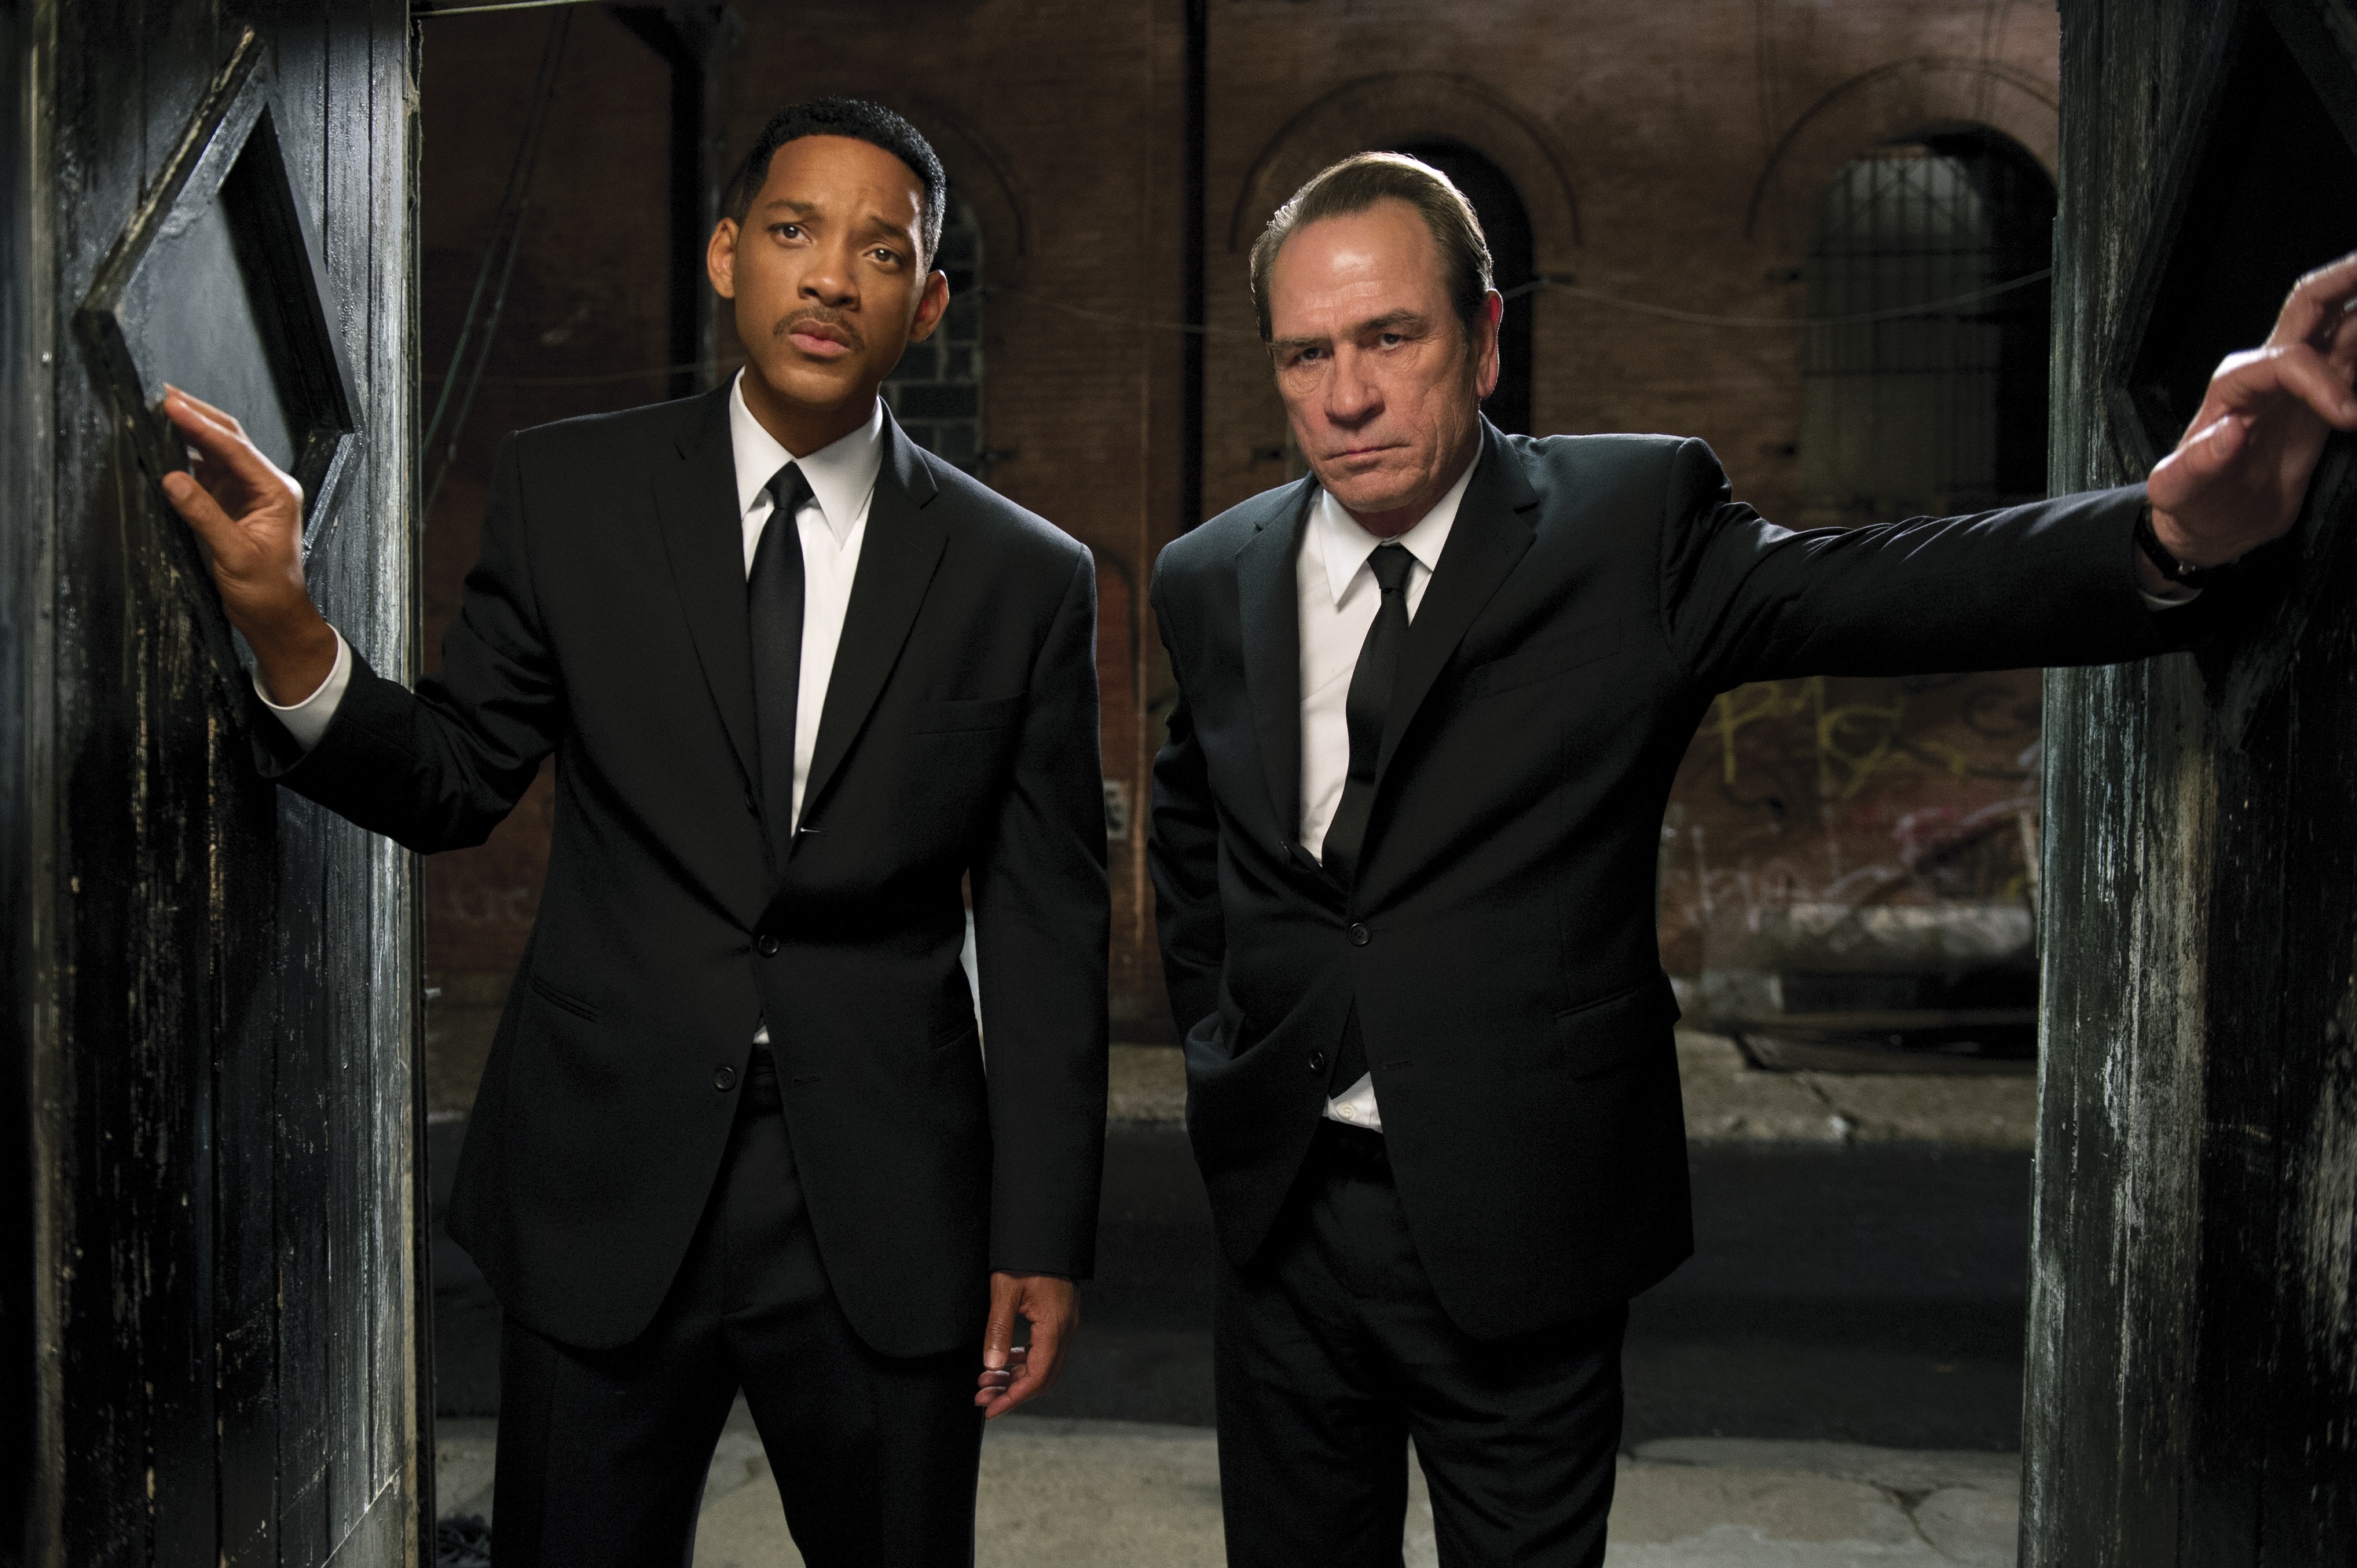 Can You Match the Movie to Its Tagline? Men in Black